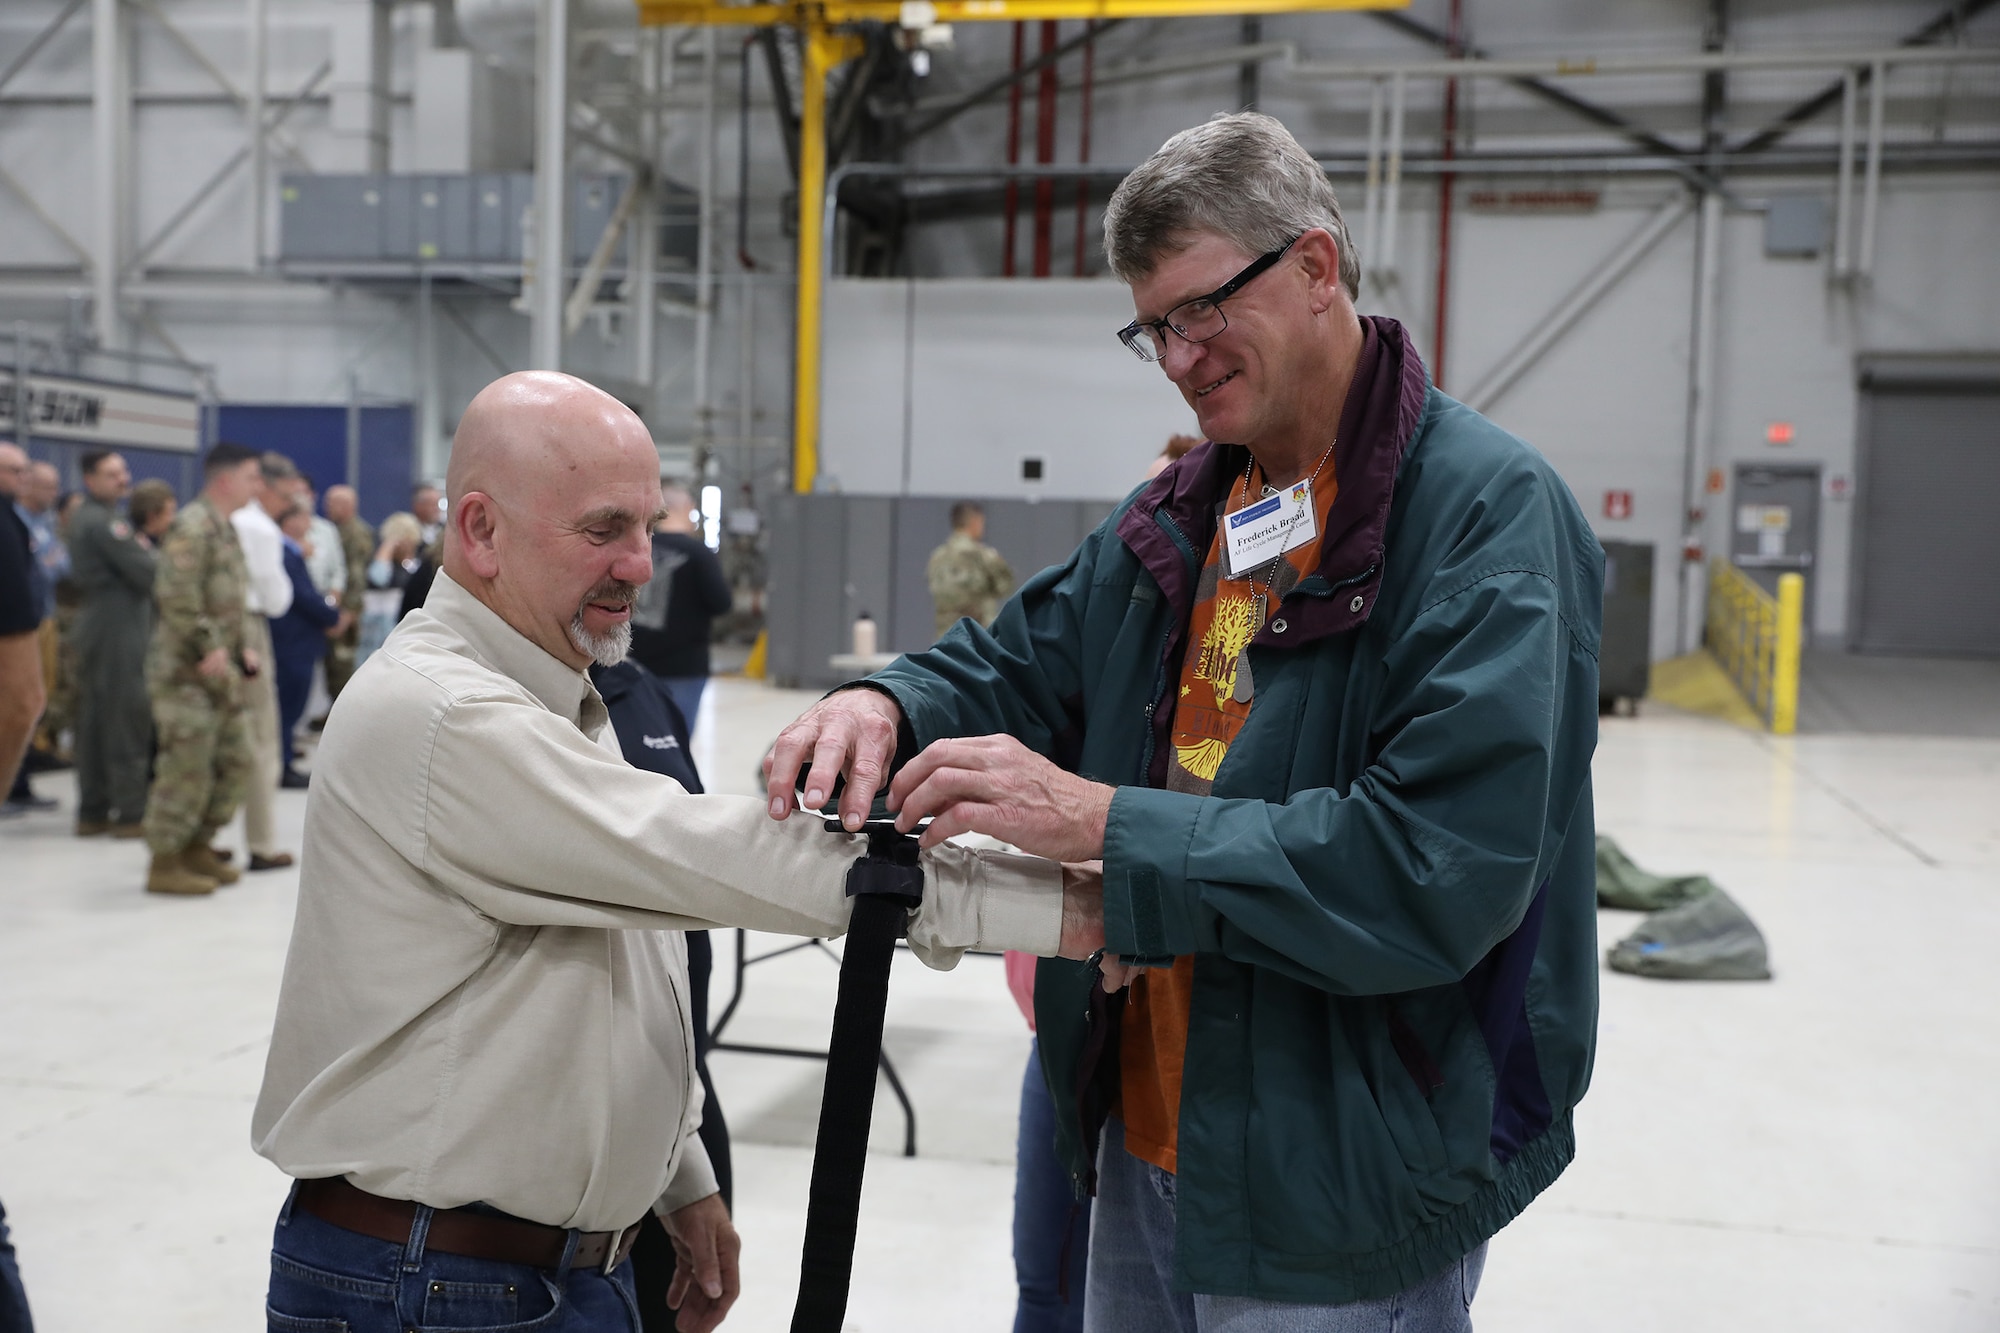 Frederick Brand practices putting on a tourniquet on Tim Kalt's arm during a hand-on demonstration run by the 445th Aerospace Medicine Squadron as part of the 445th Airlift Wing Employer Appreciation Day Nov. 5, 2022. More than 40 employers of 445th AW reservists were treated to breakfast and lunch and had the opportunity to participate in demonstrations and a C-17 Globemaster III Bosslift flight.